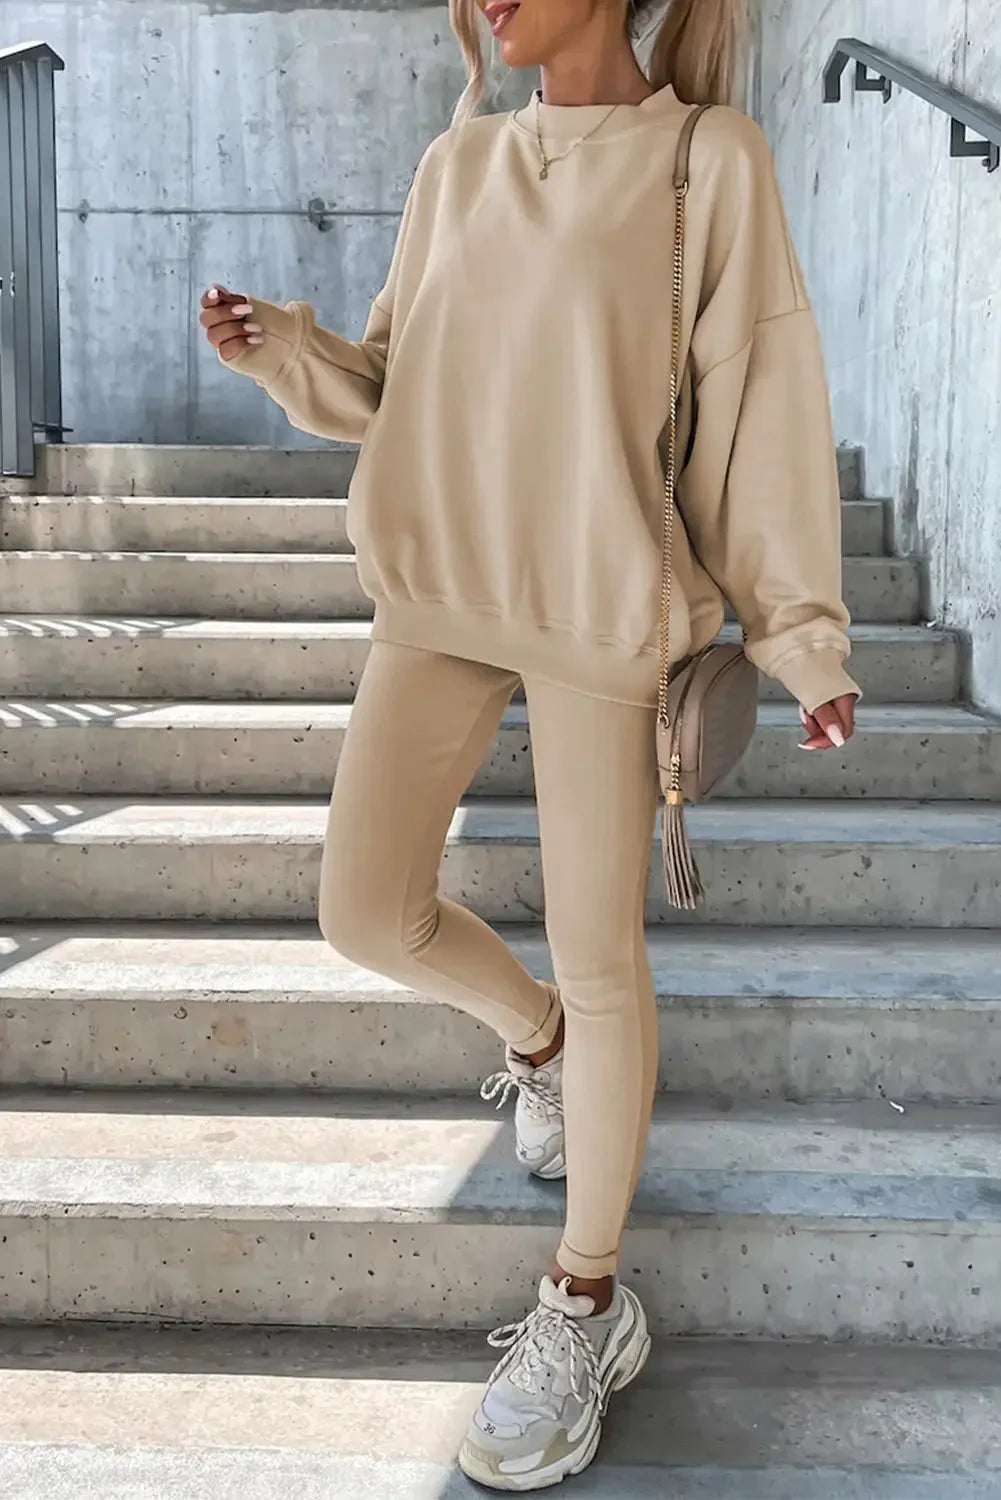 Beige solid sweatshirt and leggings two piece set - l / 50% polyester + 50% cotton - pants sets